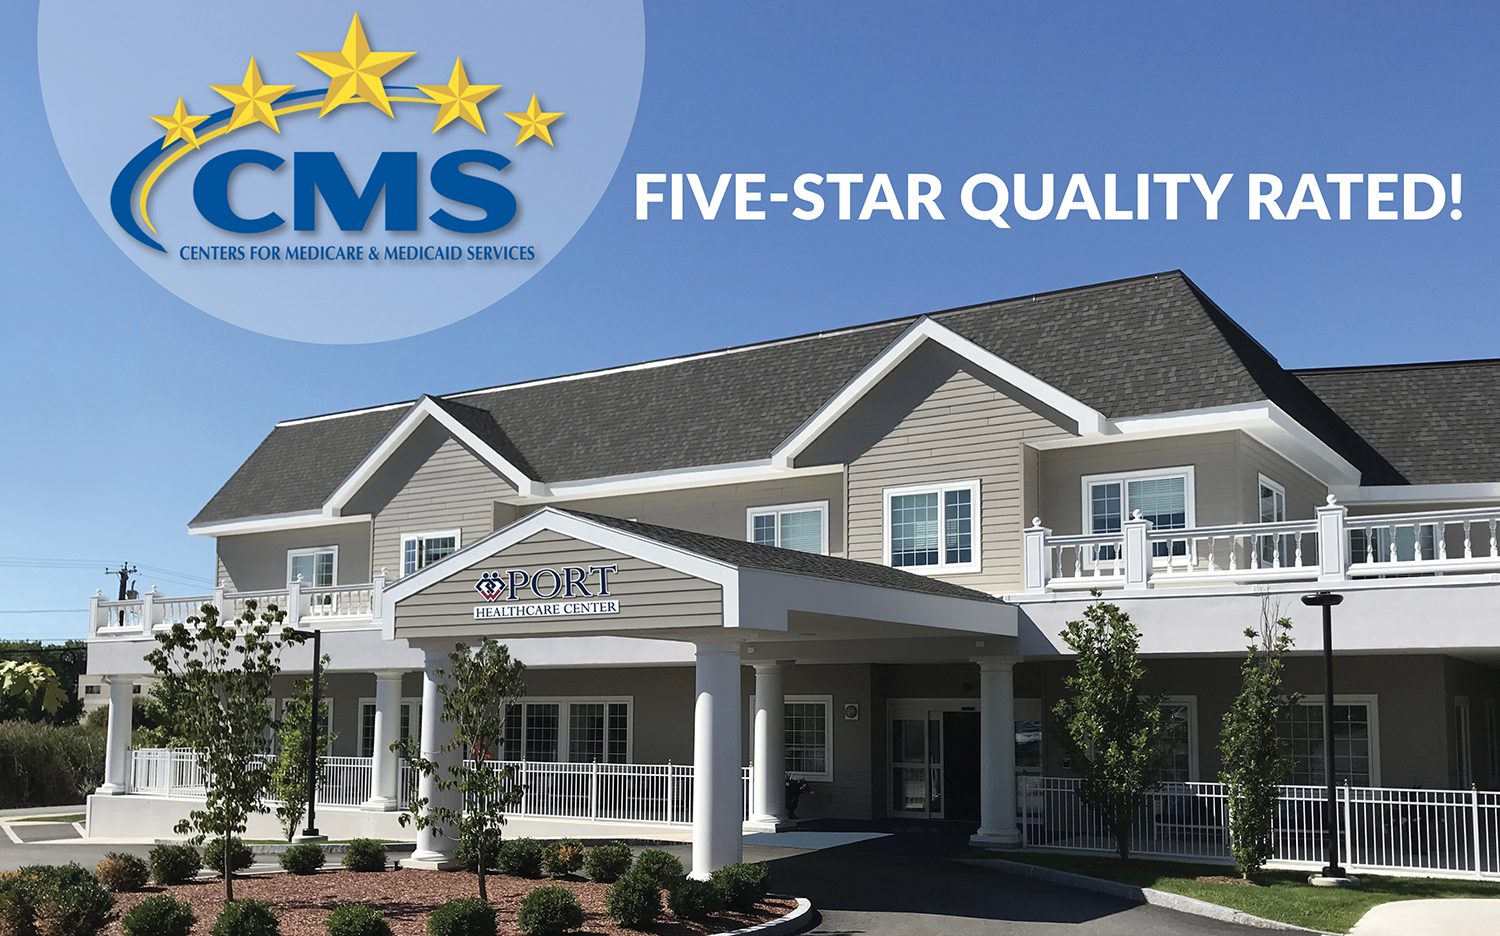 Port Healthcare Center Earns a Five-Star Rating from the Centers for Medicare & Medicaid Services.